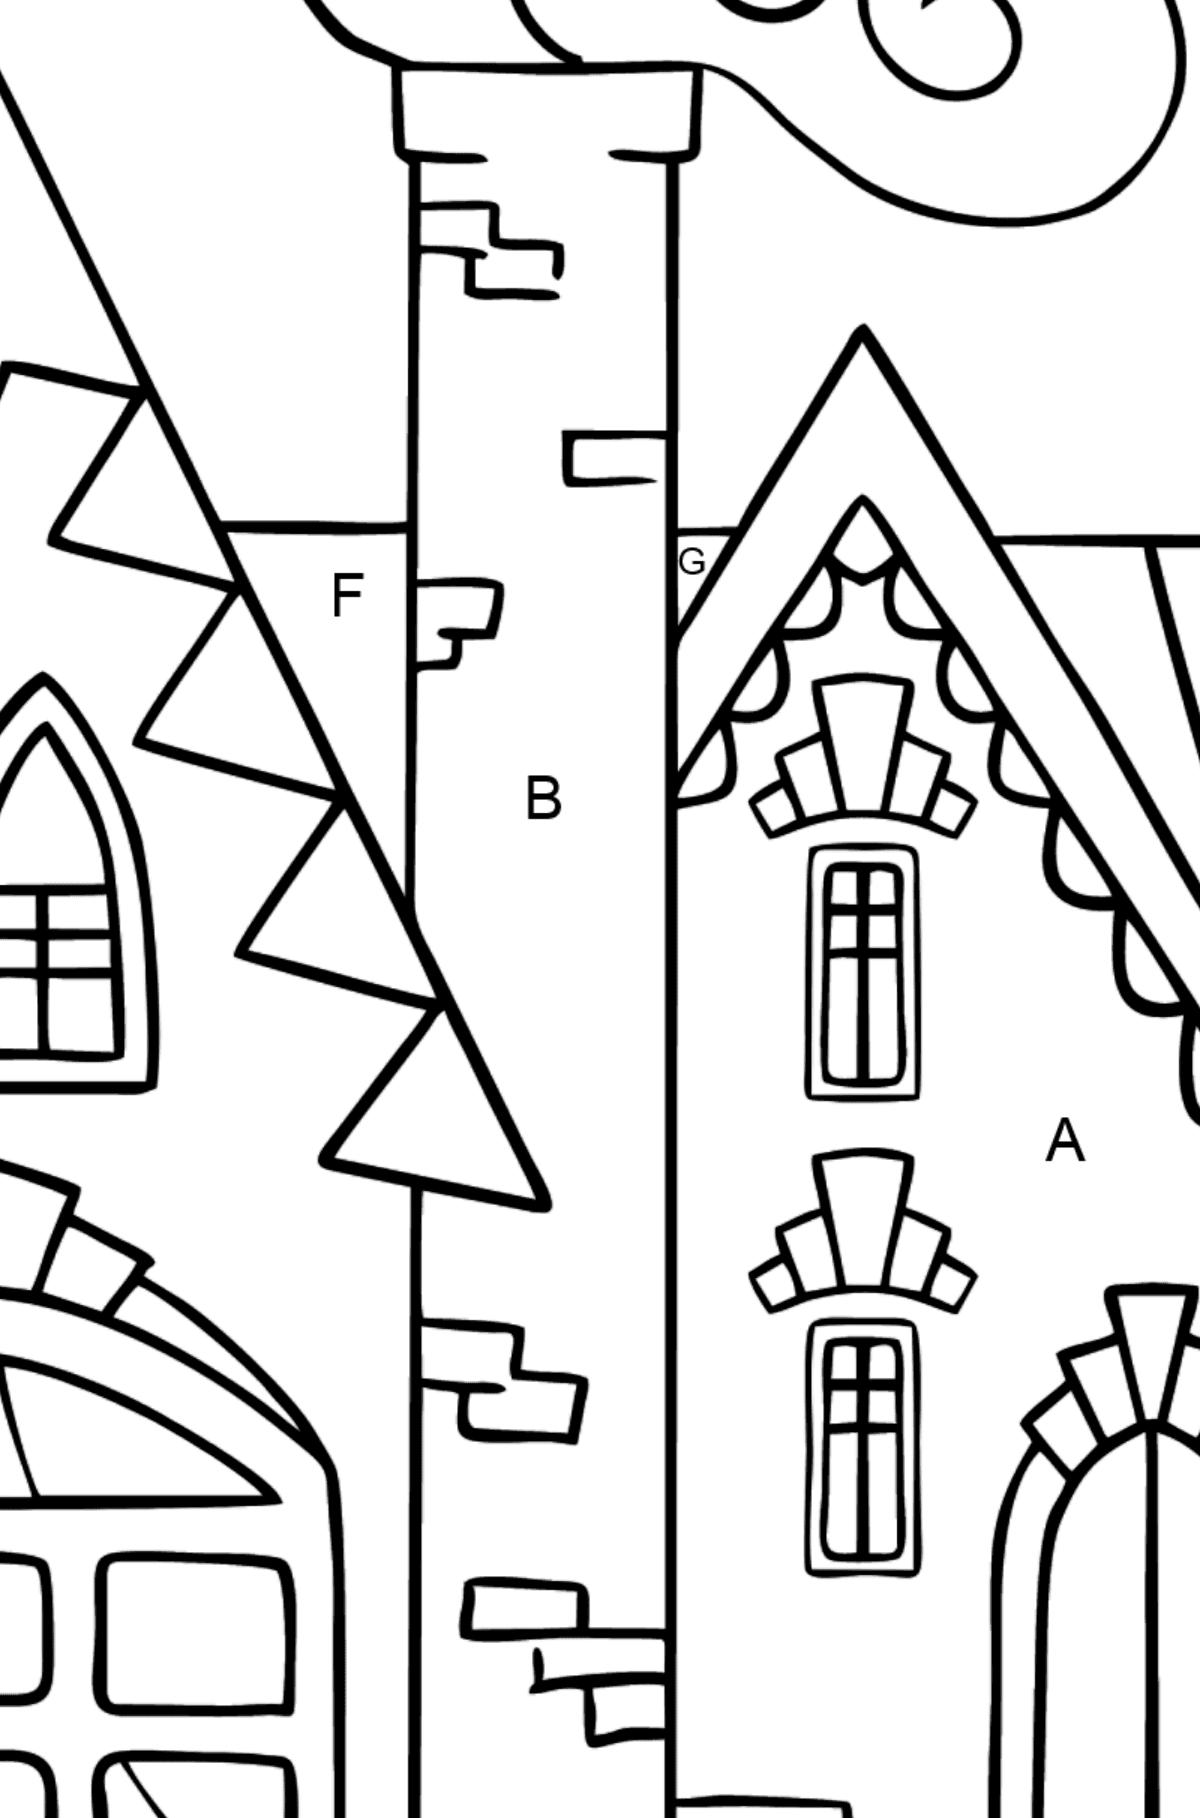 Simple Coloring Page - A Charming House - Coloring by Letters for Kids